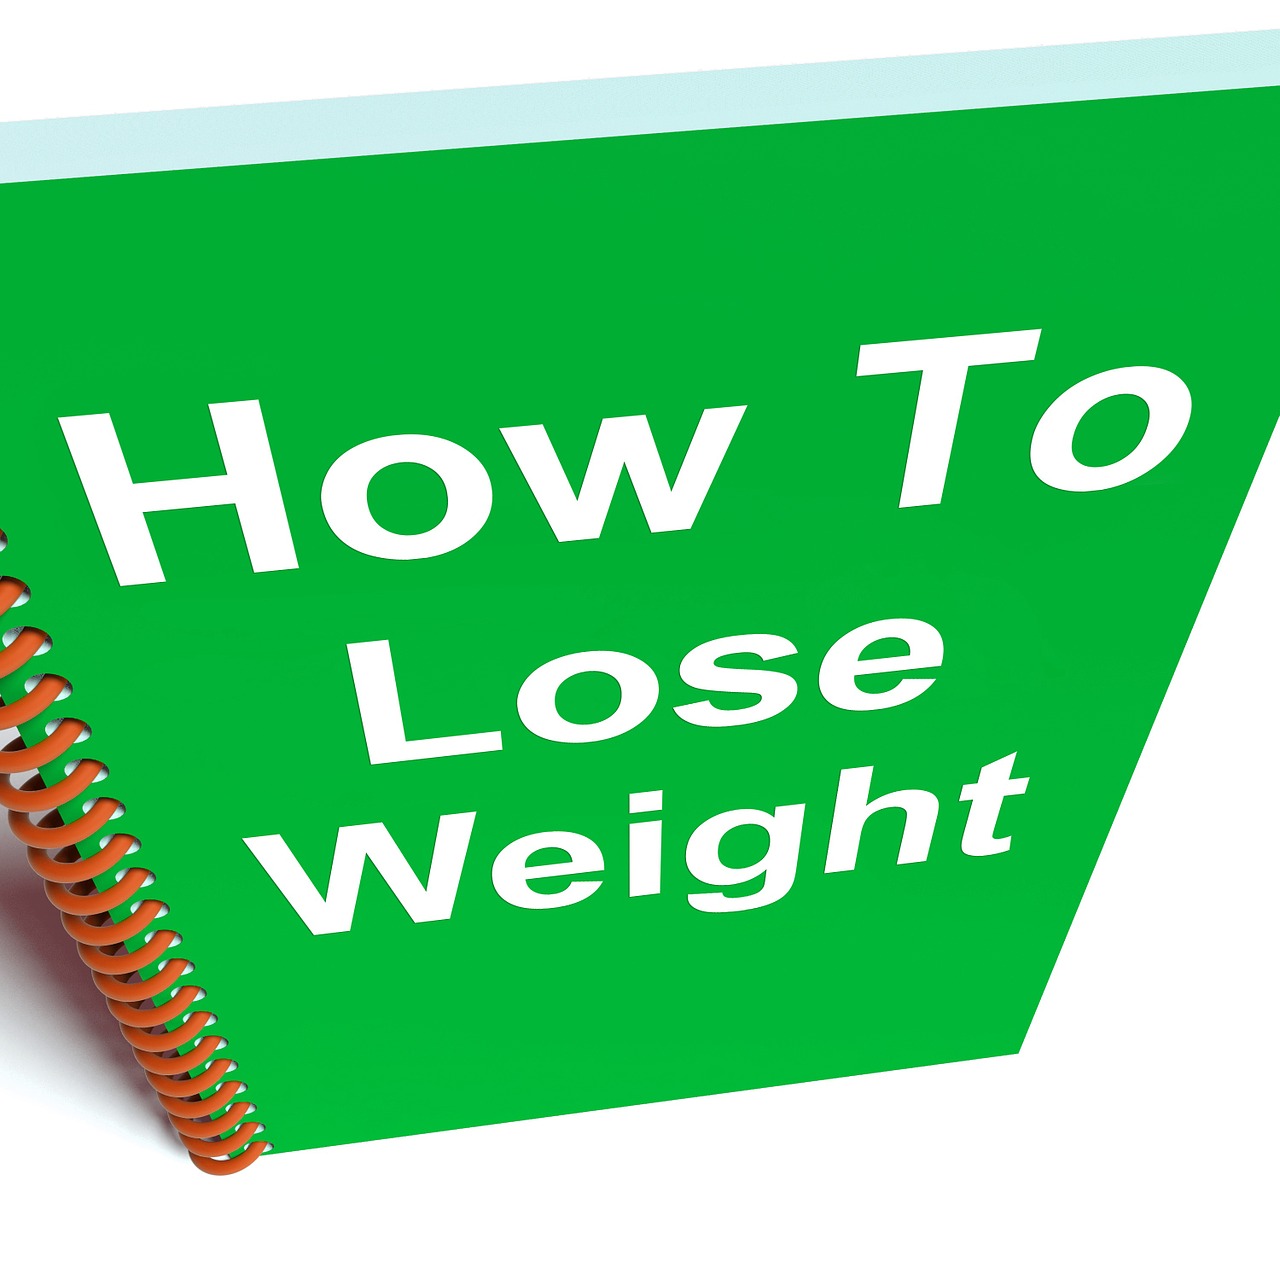 how to loose weight sign book free photo